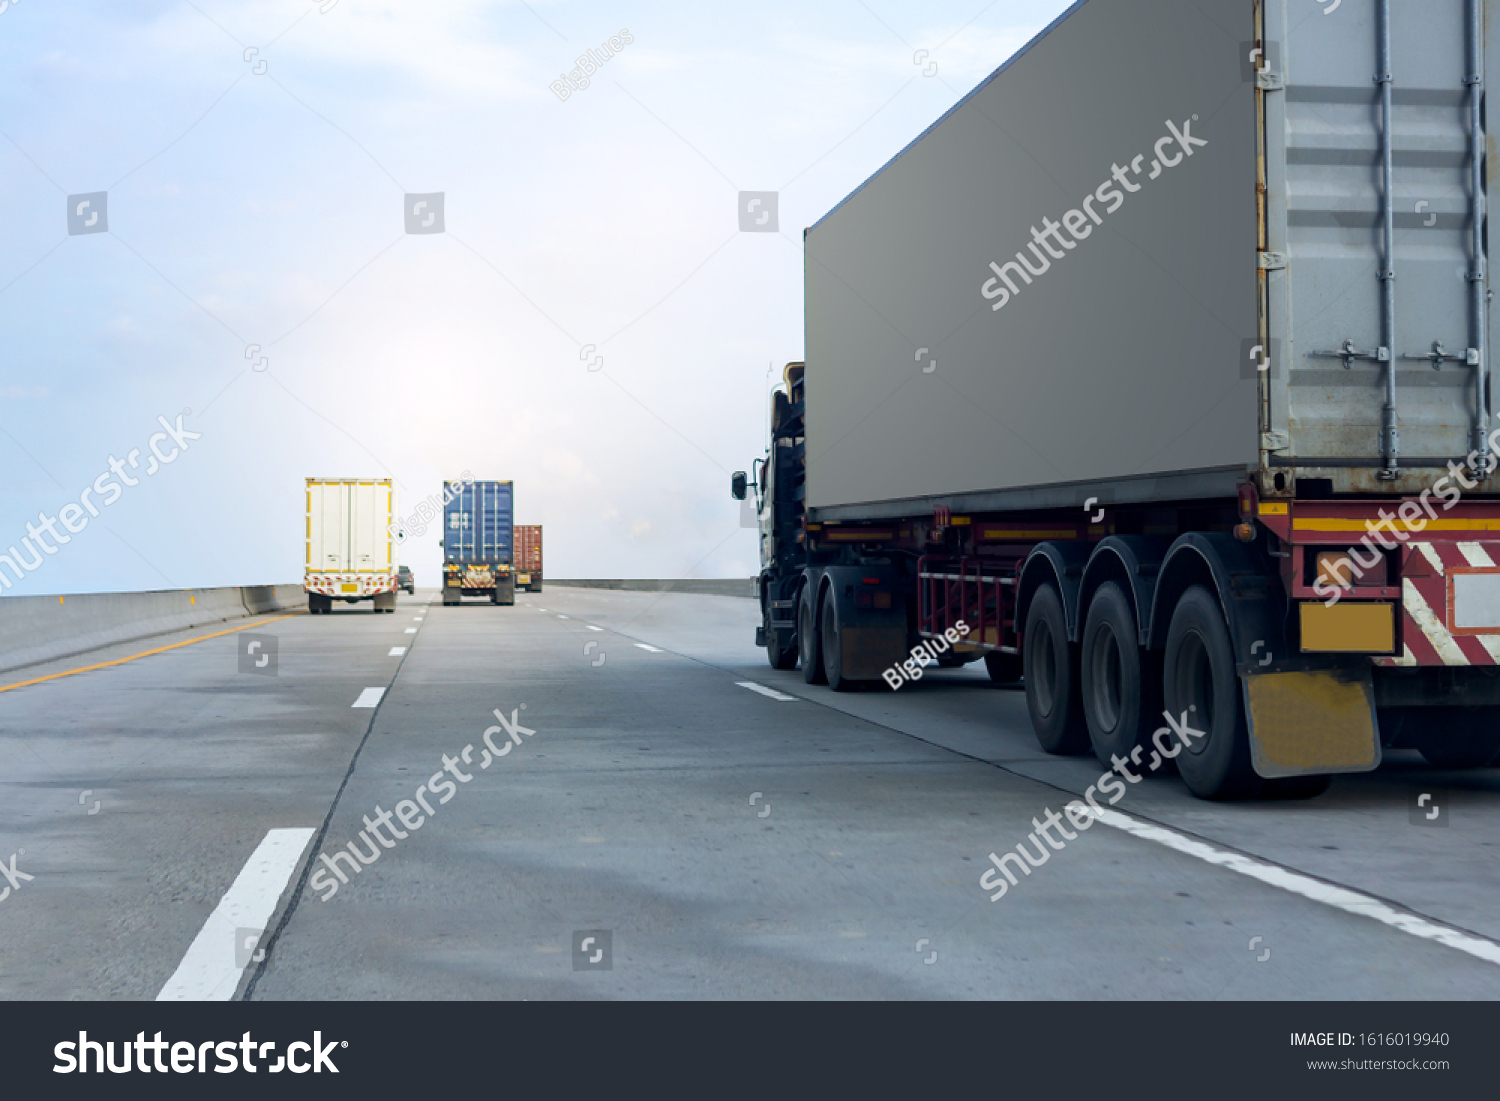 Truck on highway road with container, transportation concept.,import,export logistic industrial Transporting Land transport on the asphalt expressway against blue sky #1616019940